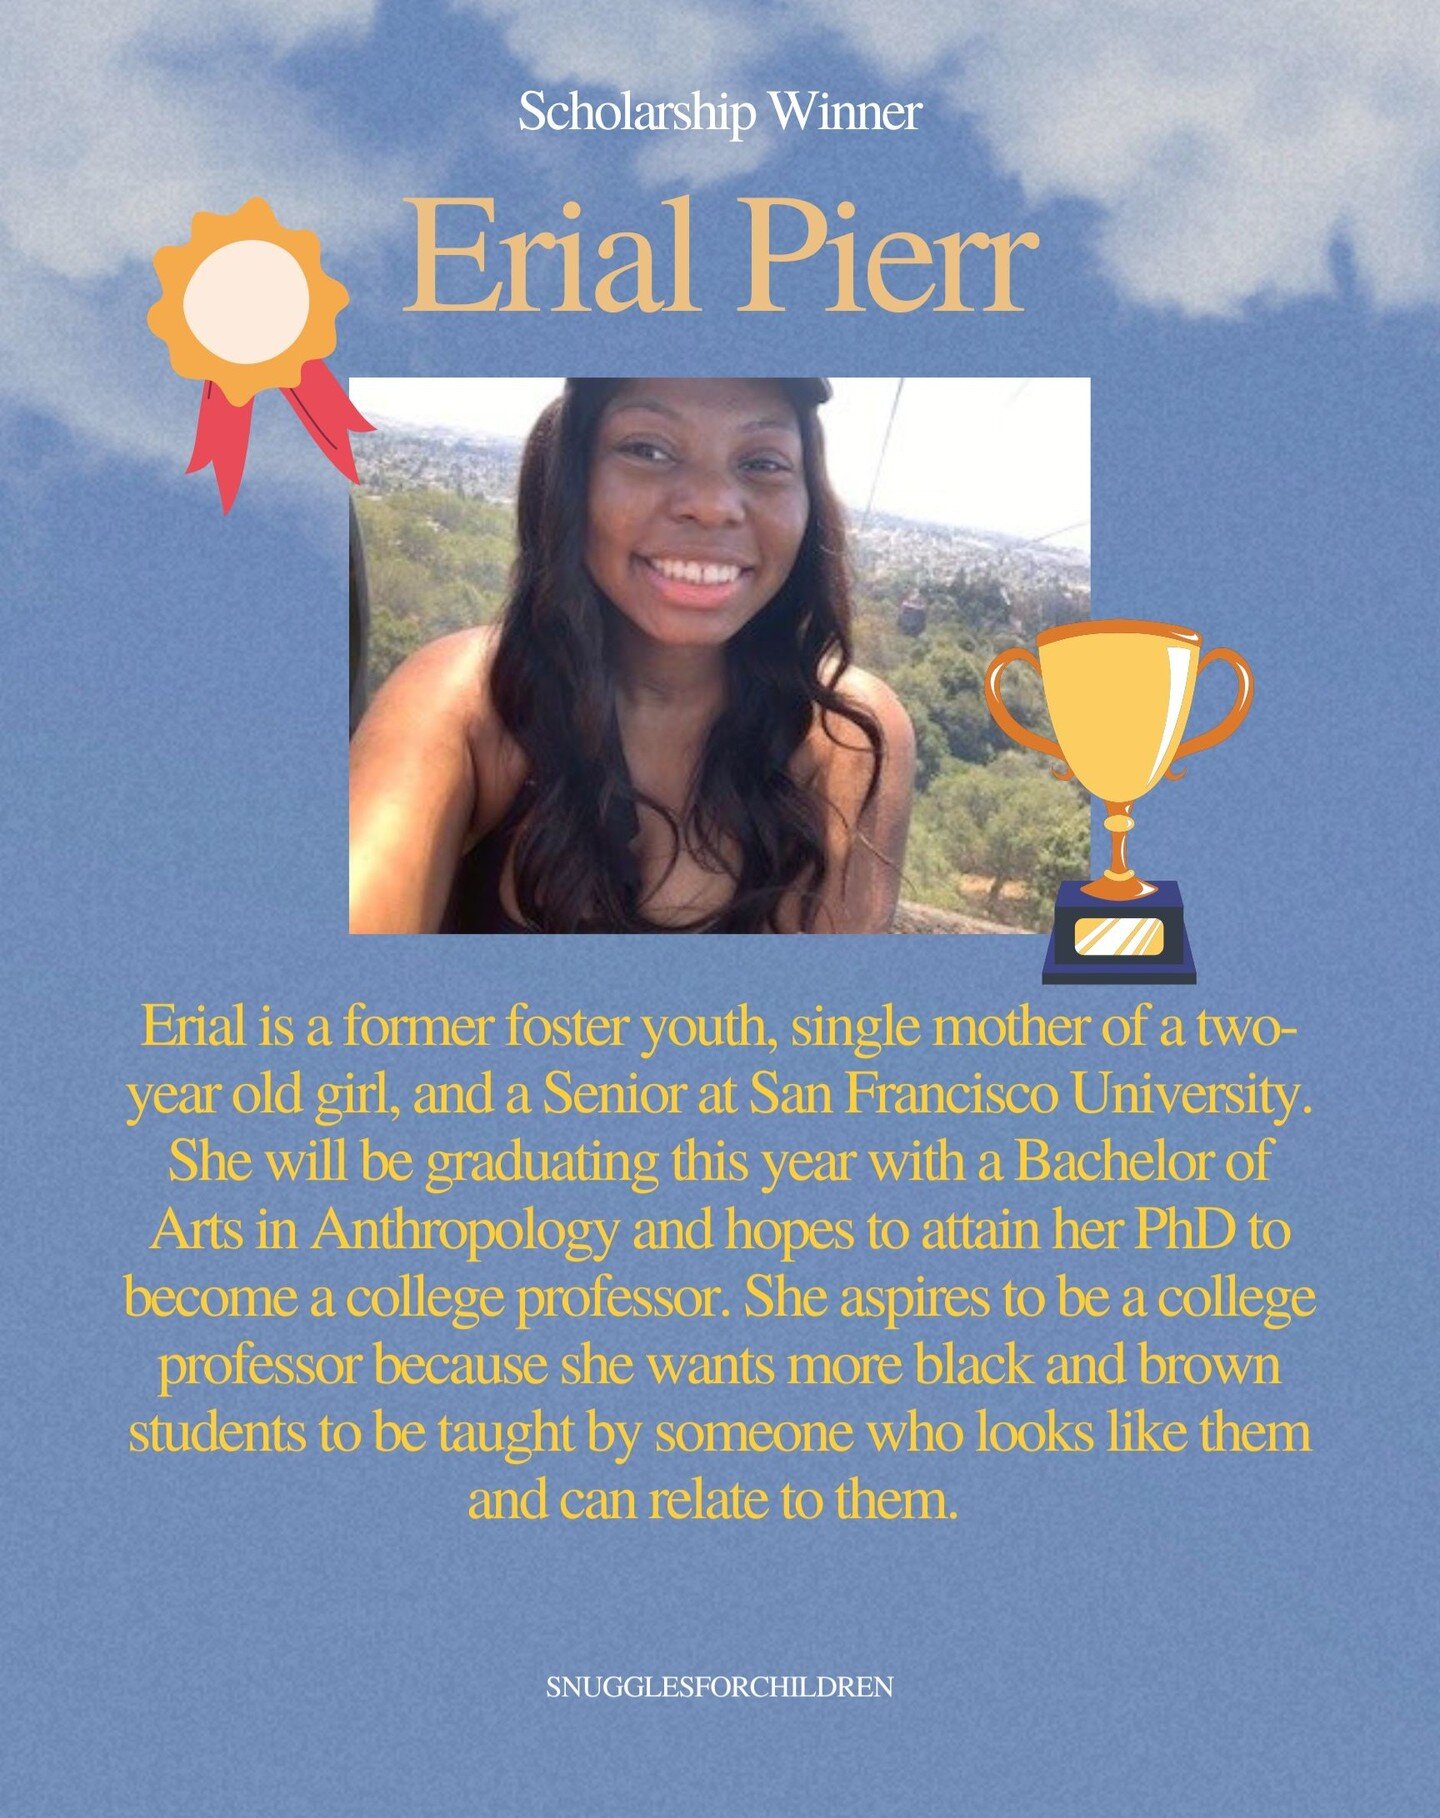 Congrats to Erial Pierr! She is awarded $2,000 with the scholarship and we wish her the best in her future! 🎉

#scholarship #fostercare #fosterchildren #college